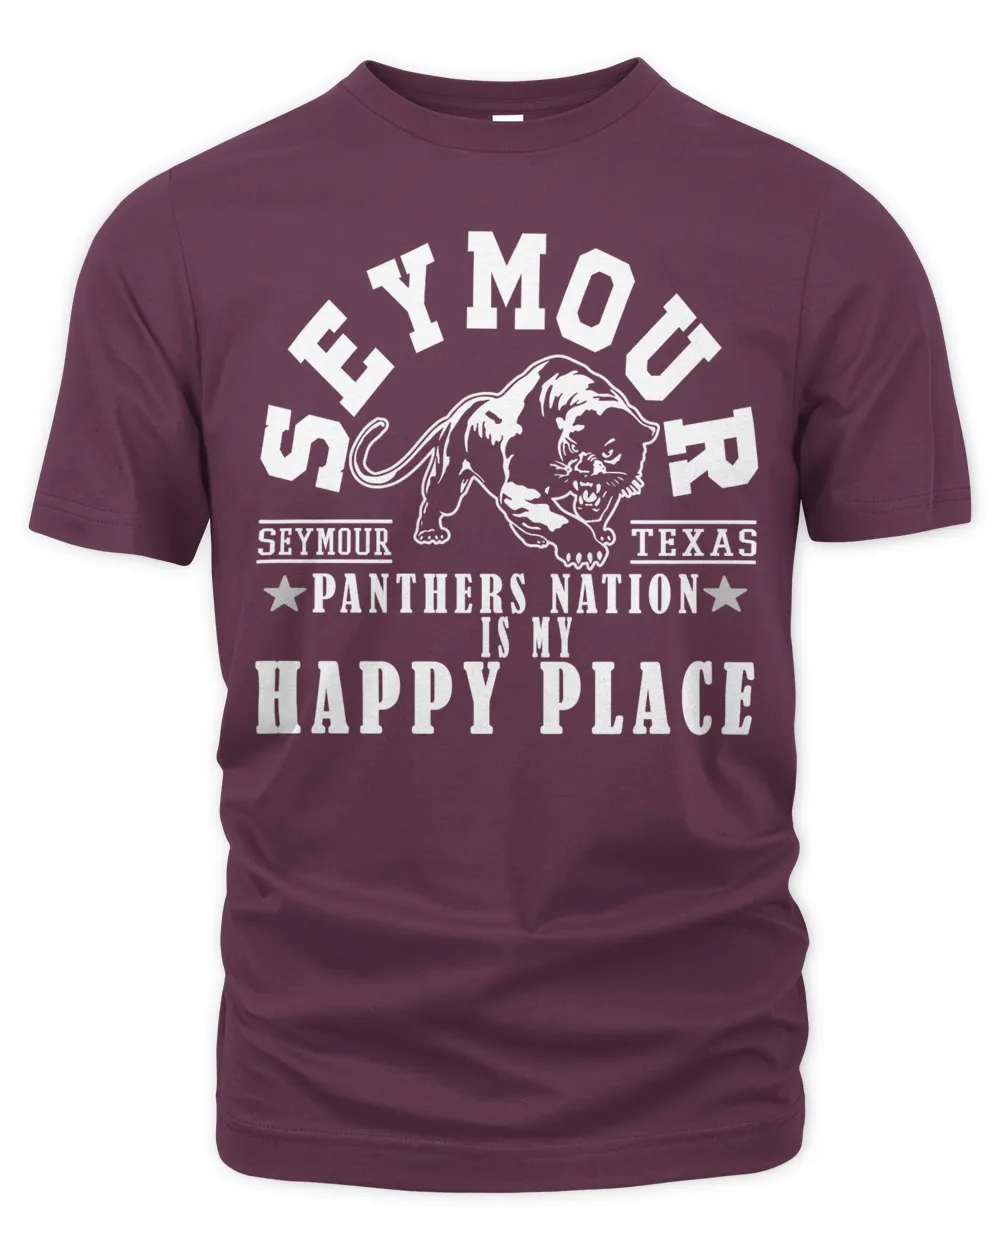 Seymour High School Panthers Nation